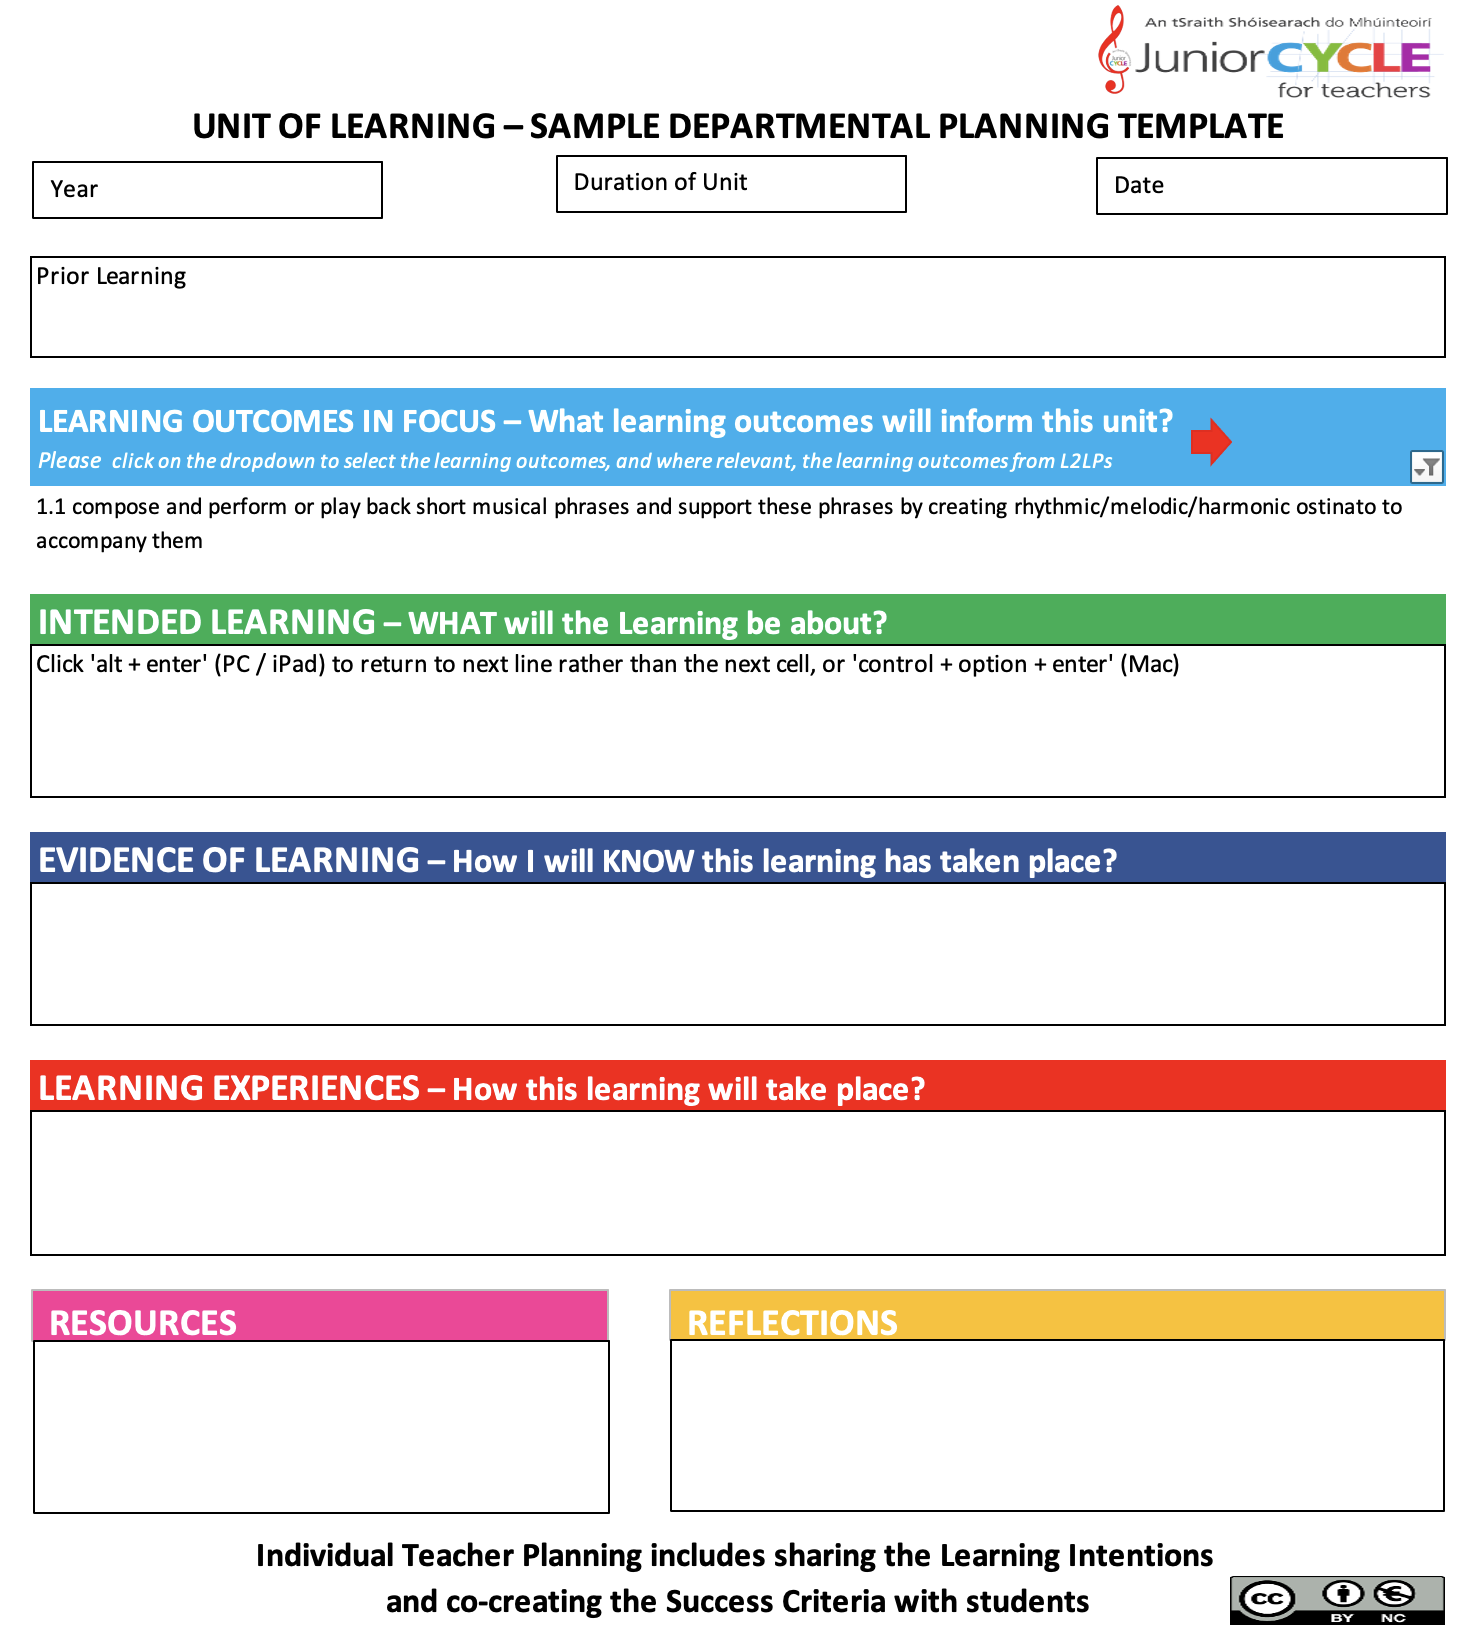 Link to Interactive Unit of Learning Planner